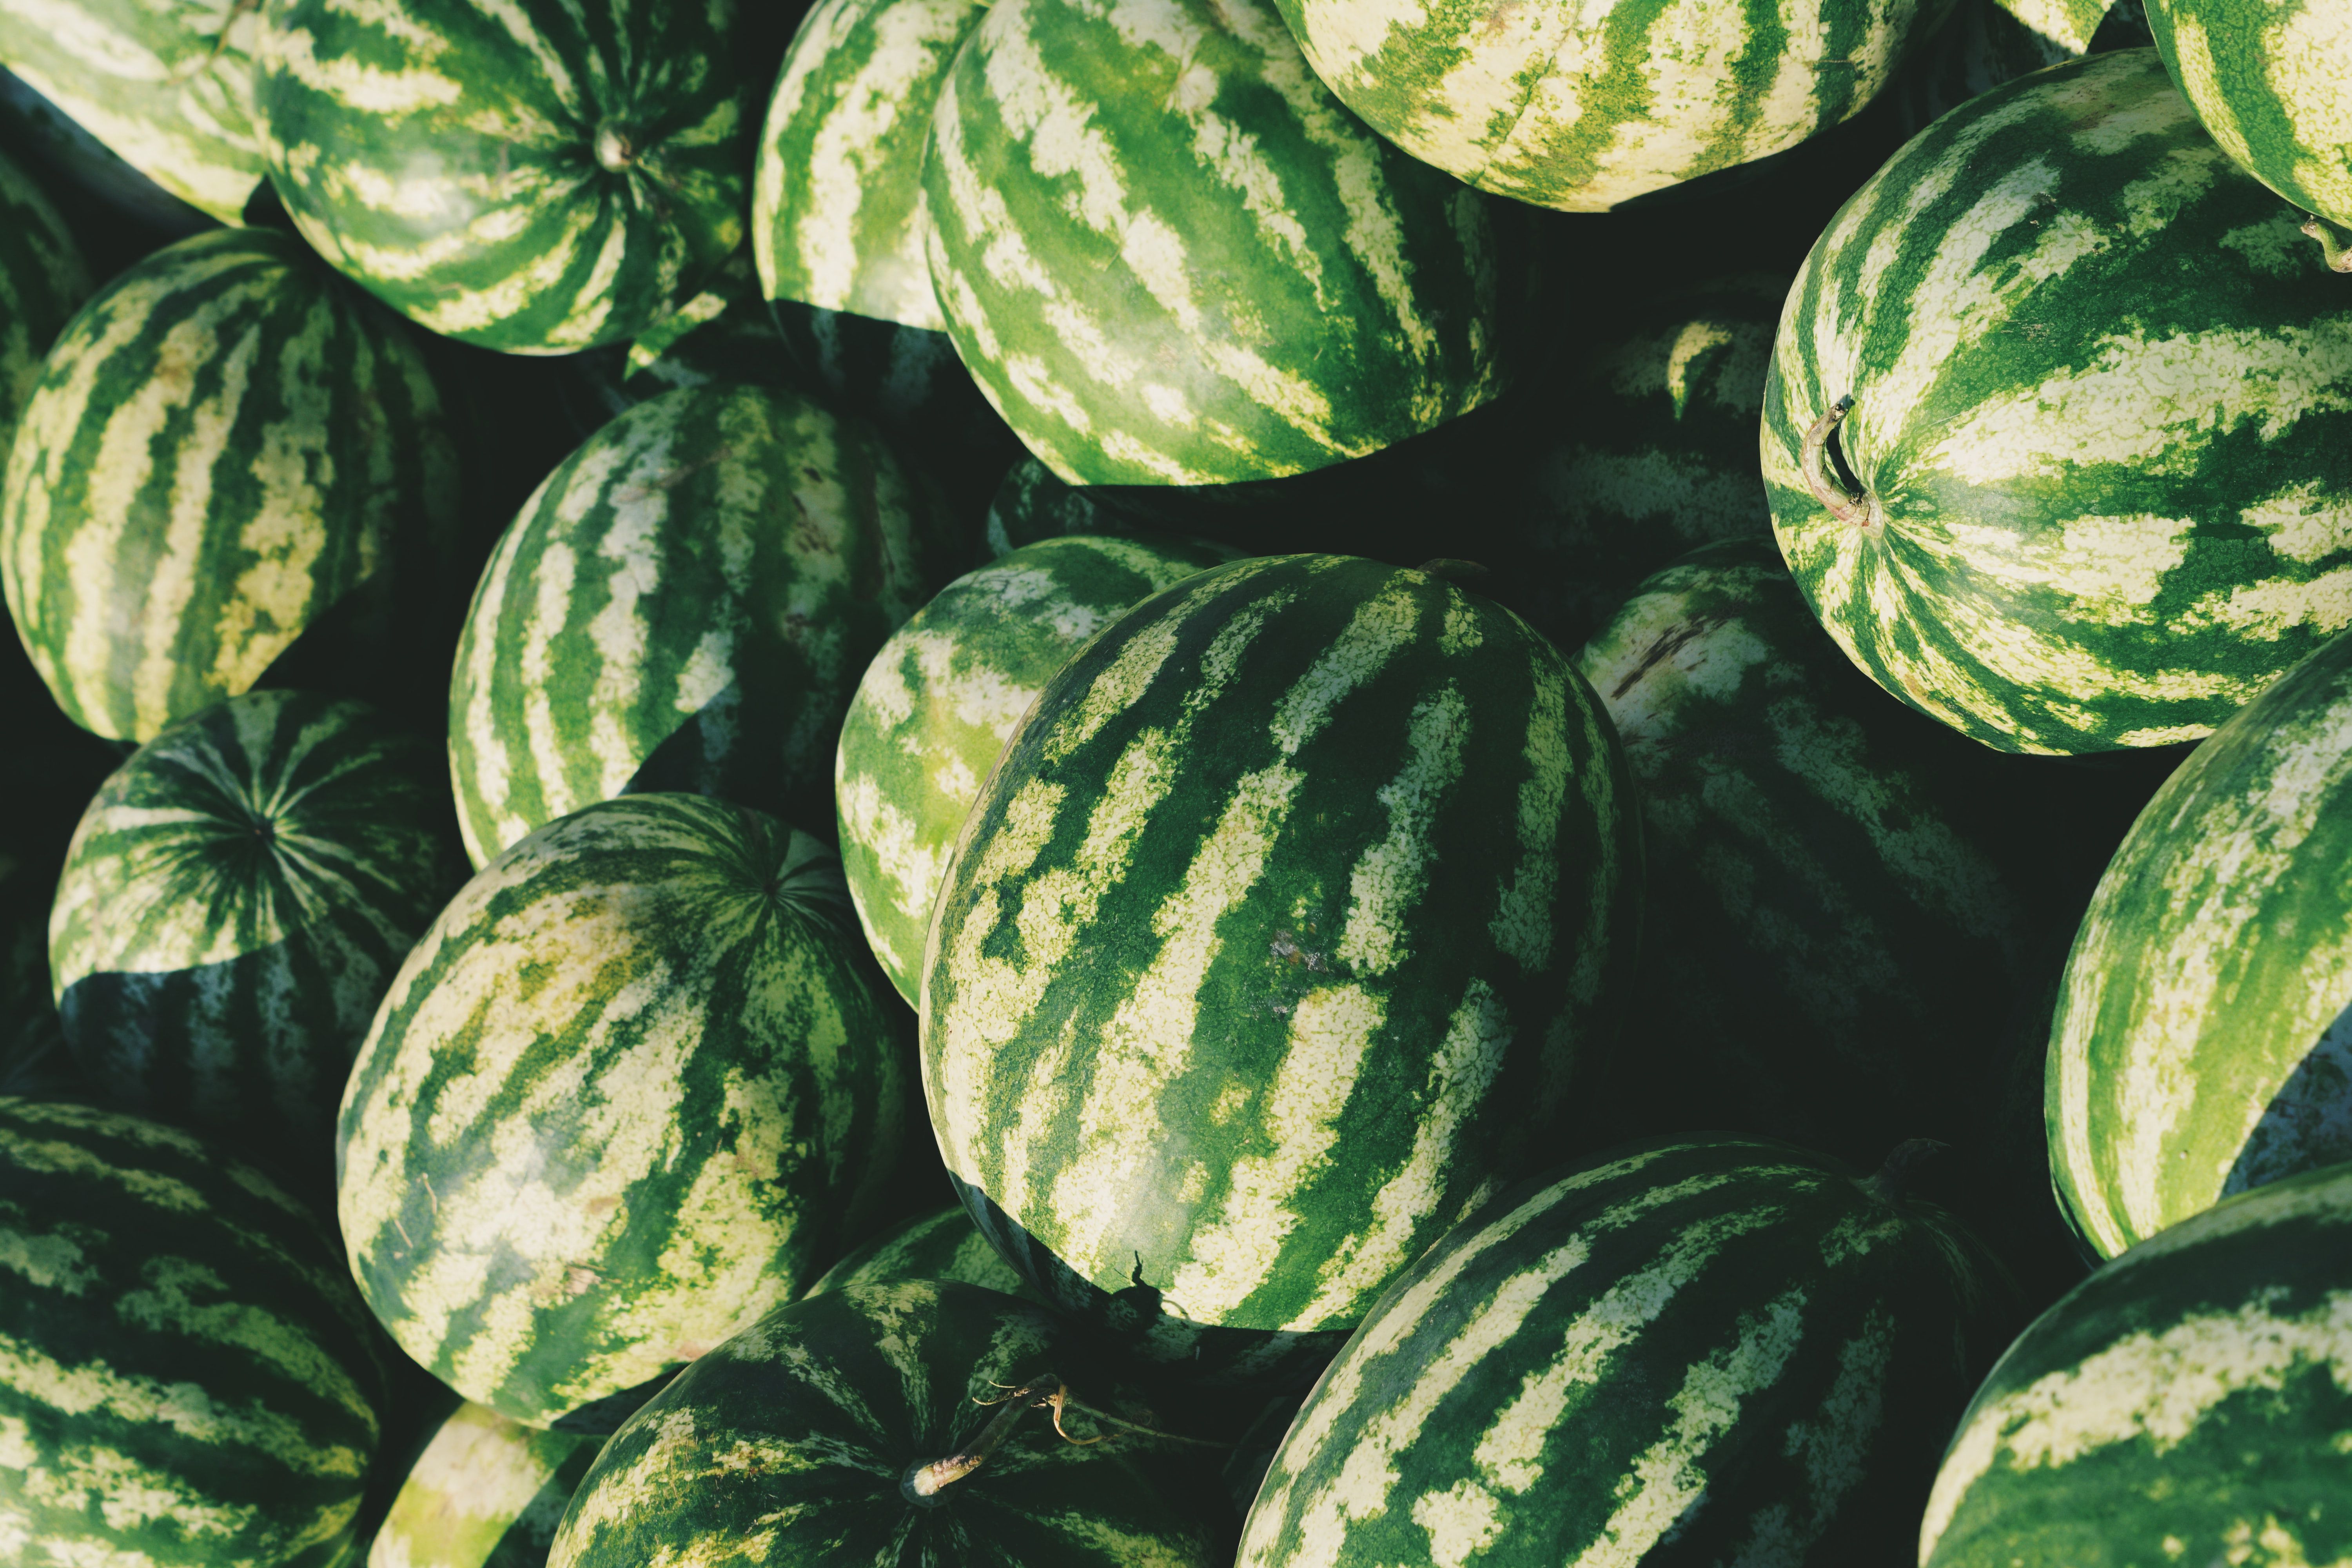 Background image of watermelon